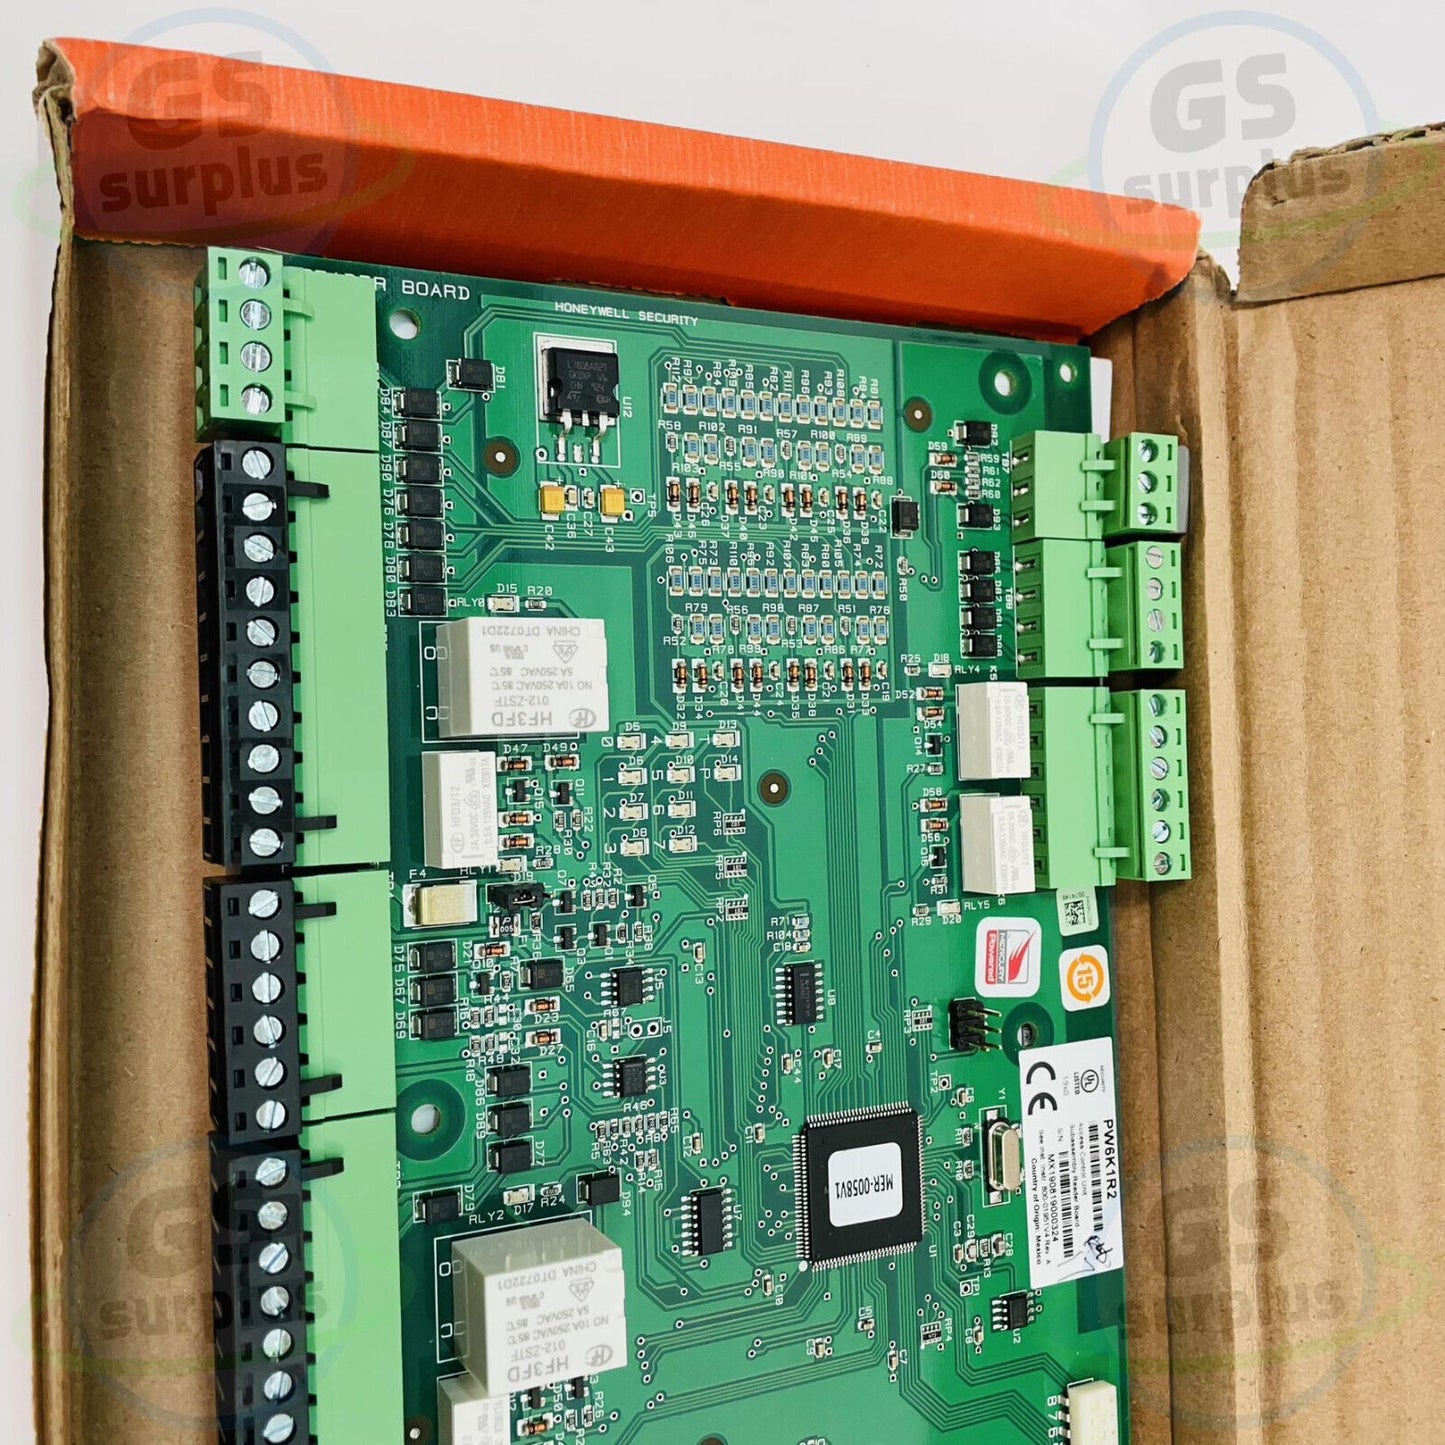 Honeywell PW6K1R2 Access Controller Access Control Motherboard, New open box